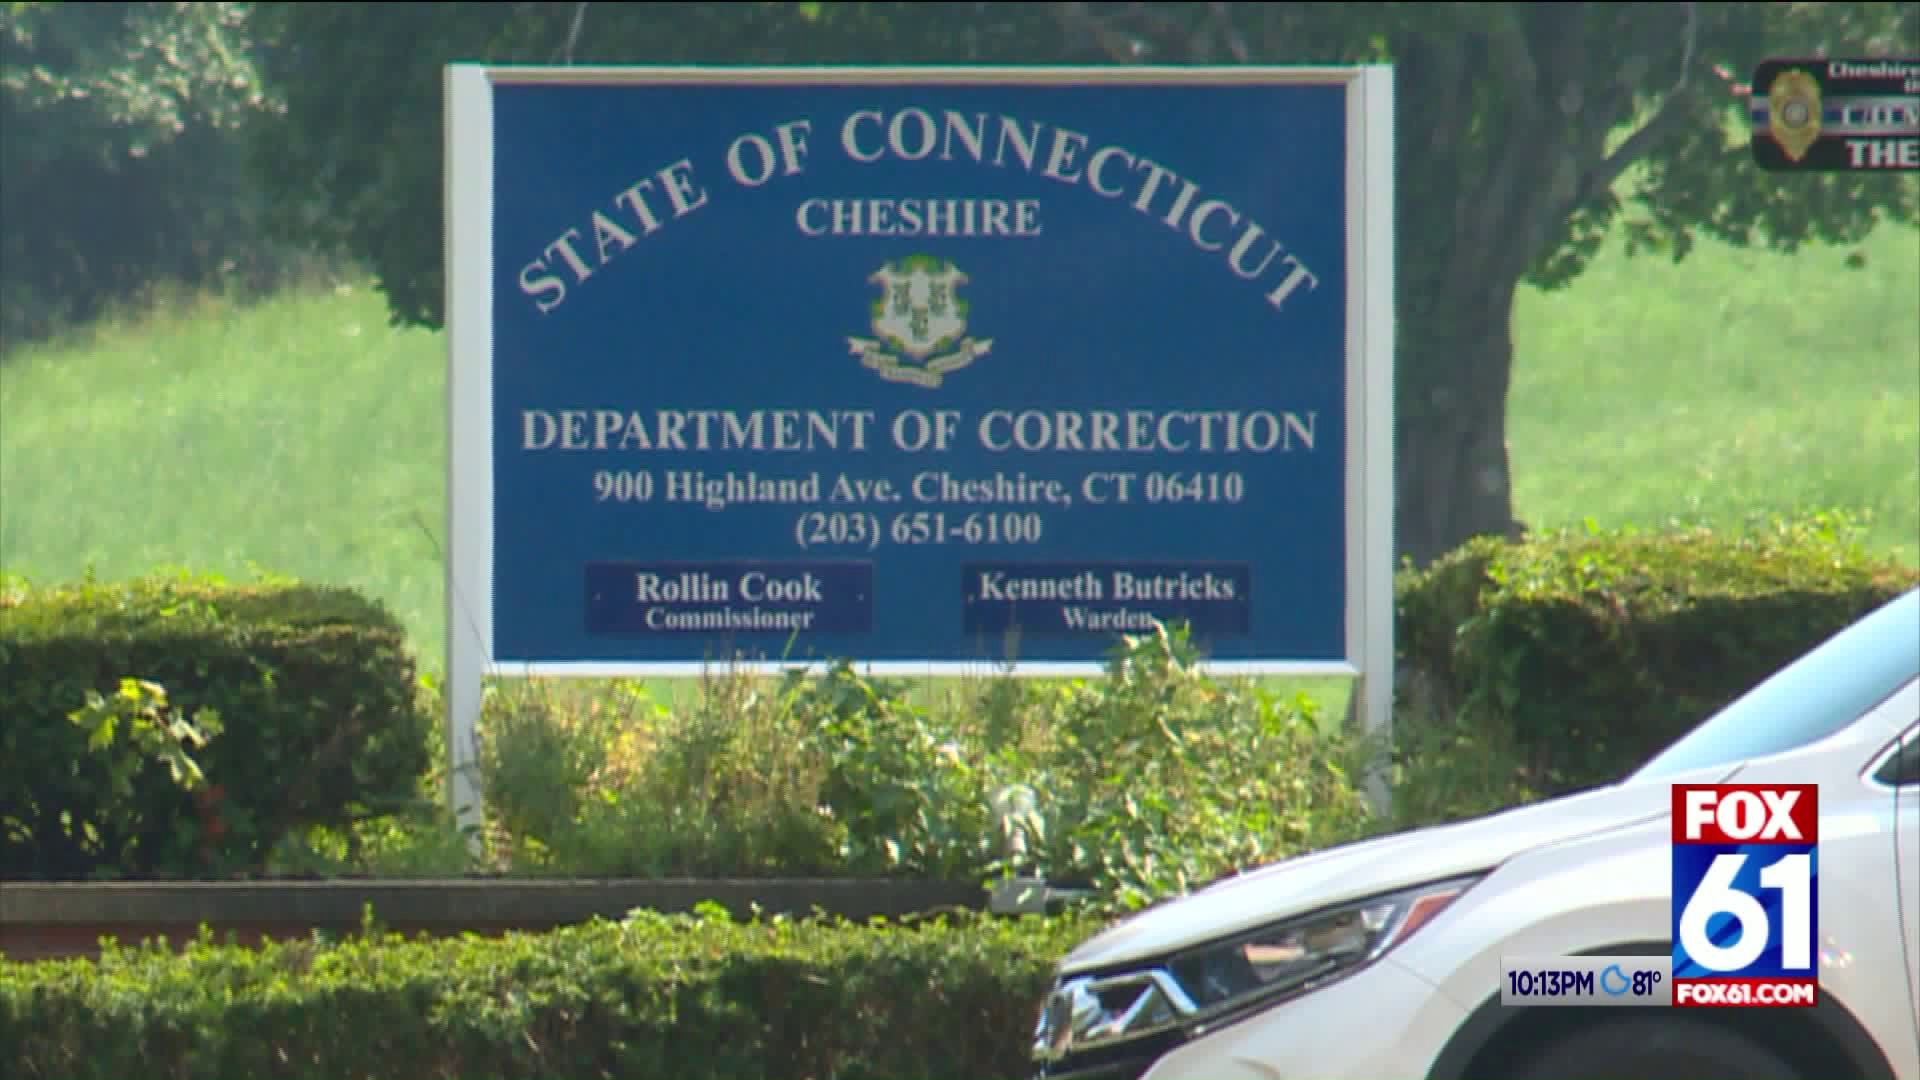 6 staff members at Cheshire Correctional released from hospital after testing negative for fentanyl exposure